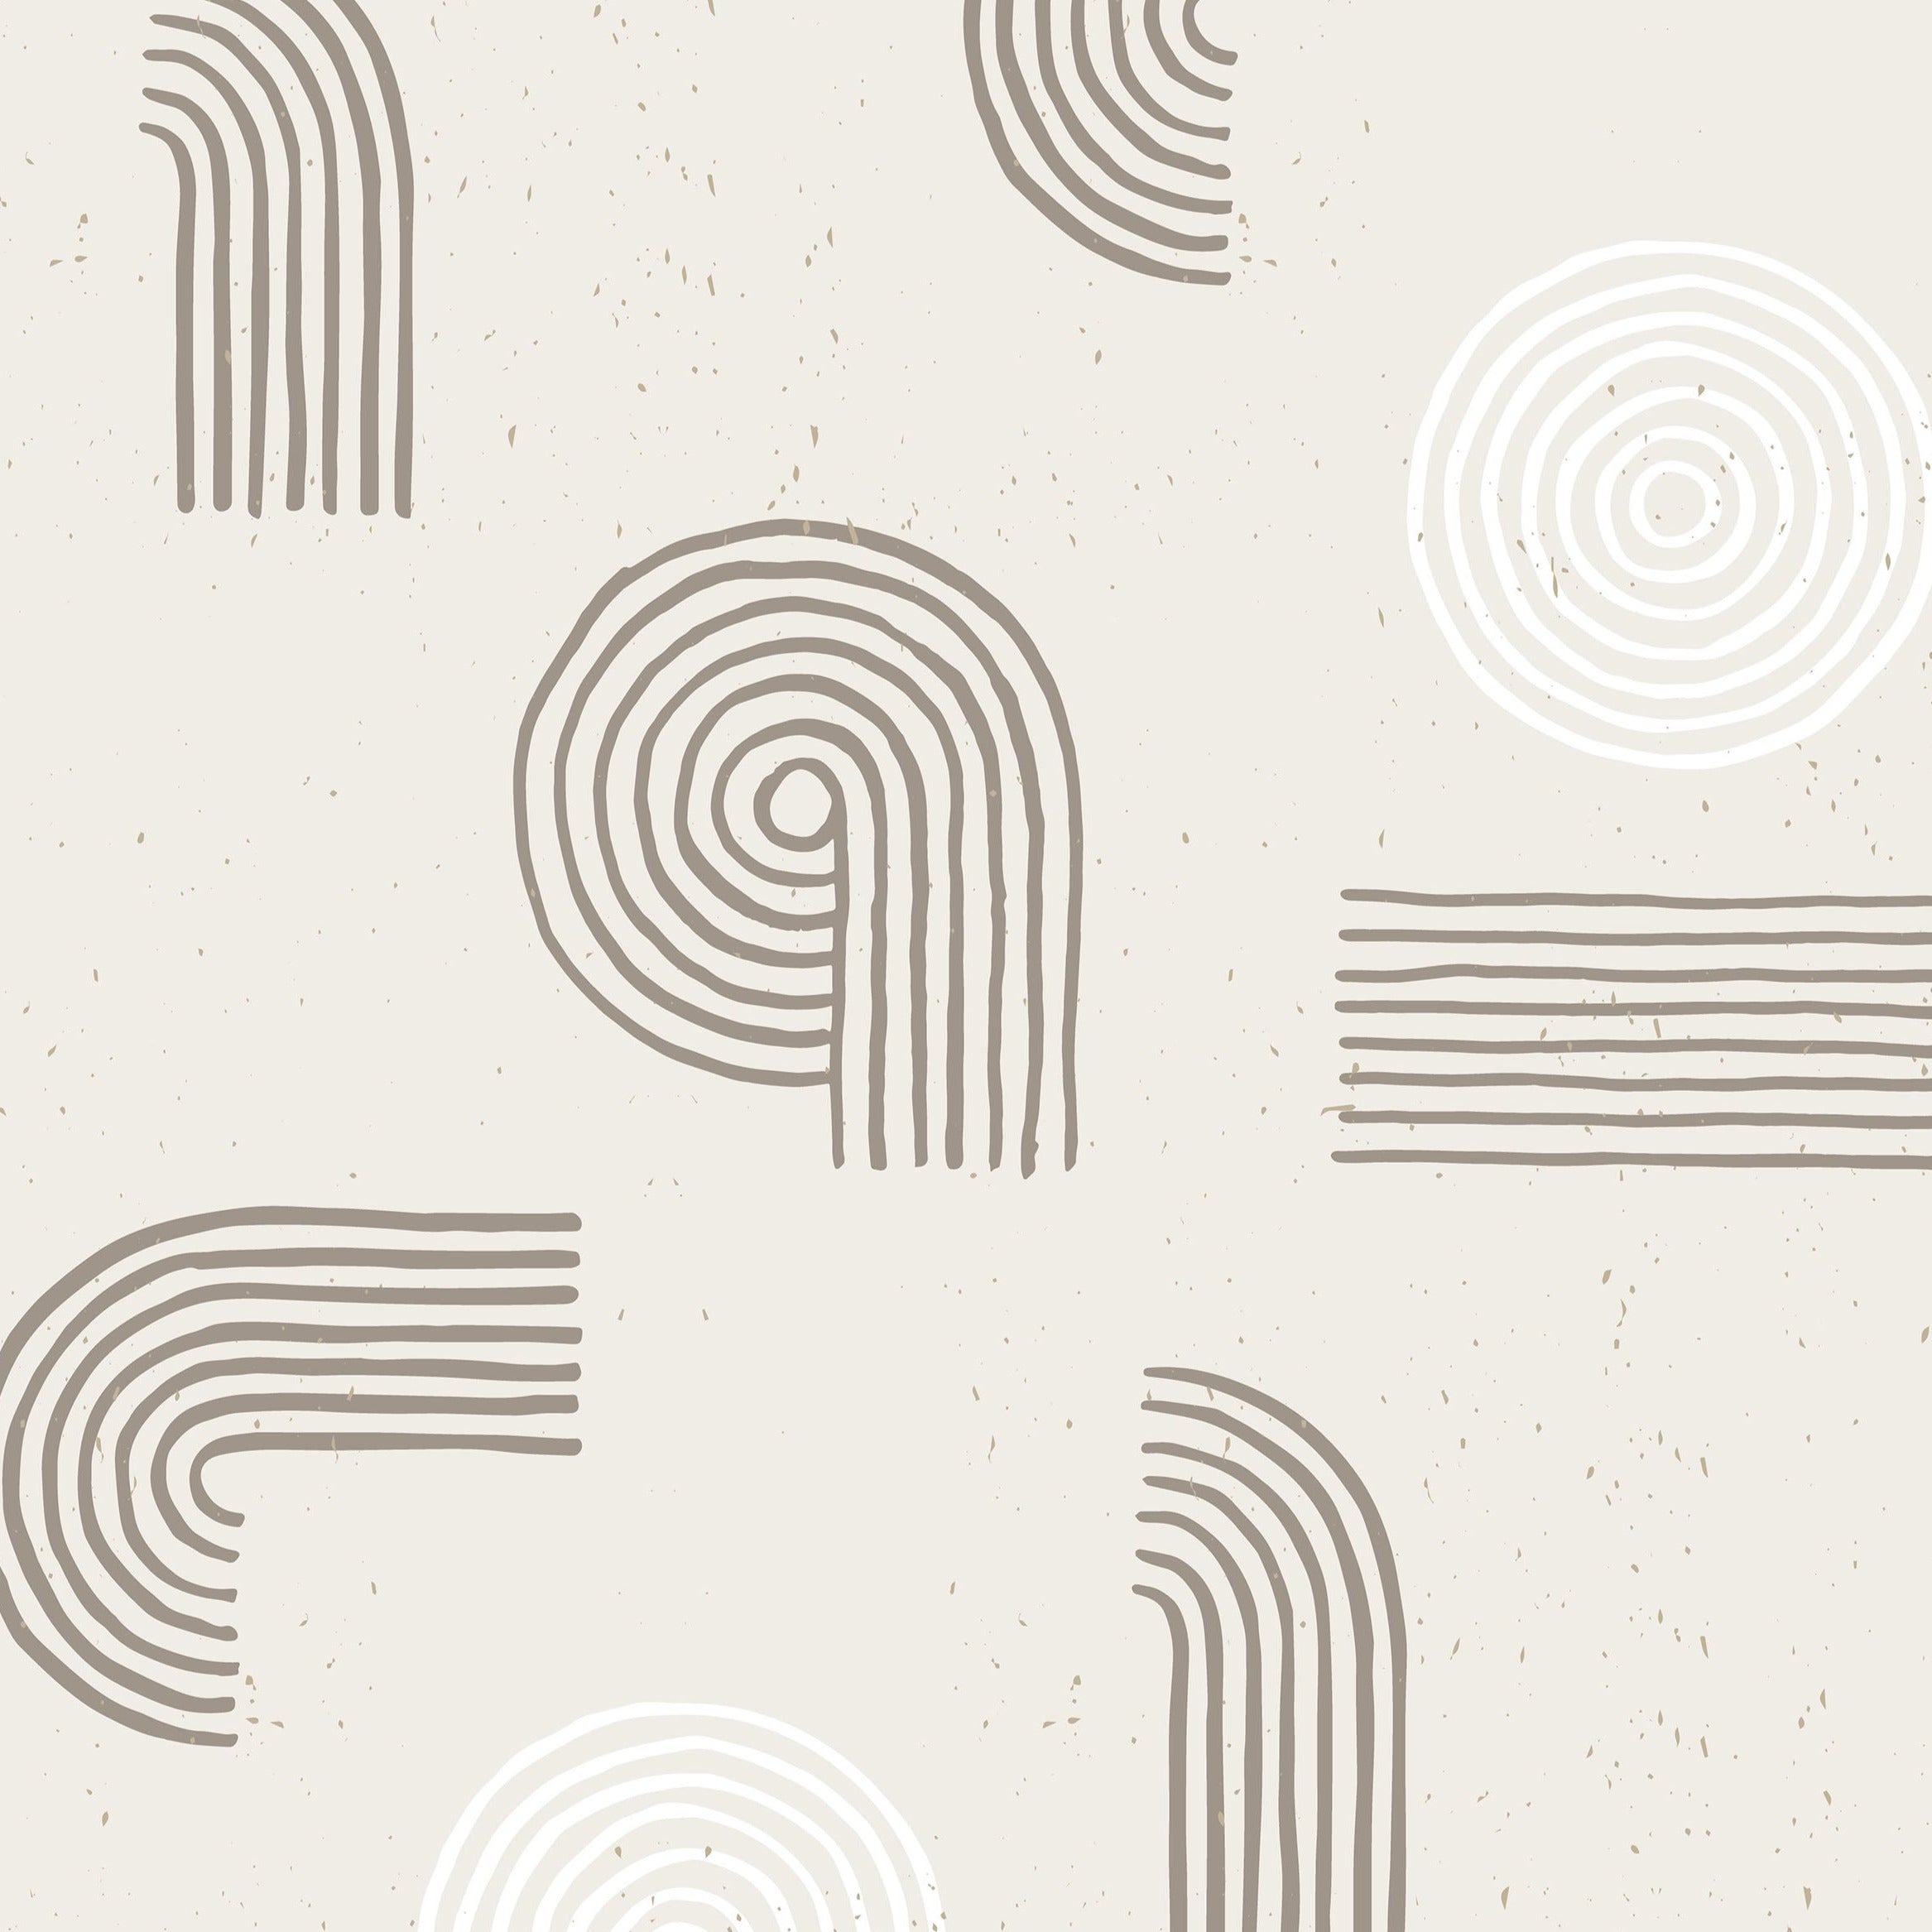 Detailed close-up of Sand Zen Geometric Wallpaper - VII, showcasing an array of abstract geometric shapes including spirals and straight lines in beige on a textured off-white background. The design emits a calming and sophisticated vibe.